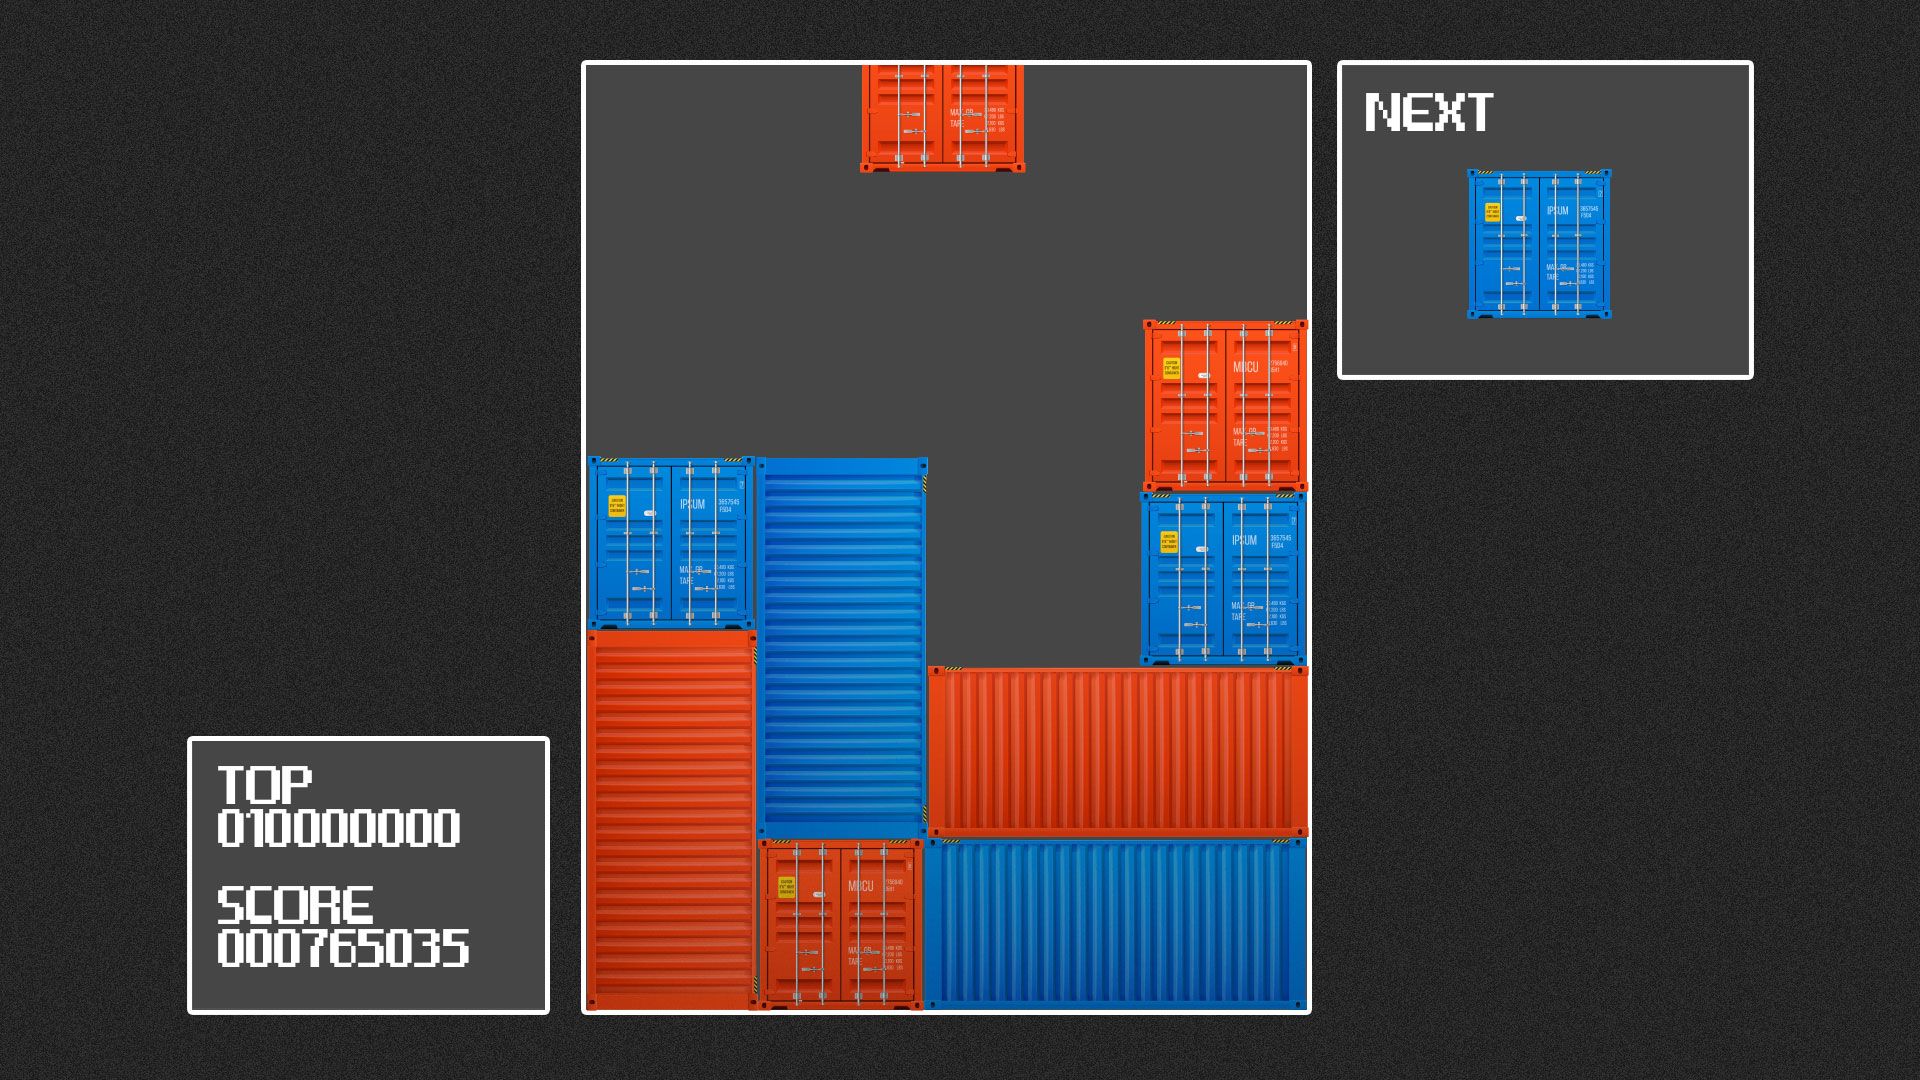 Illustration of a Tetris interface with red and blue shipping containers as the blocks.